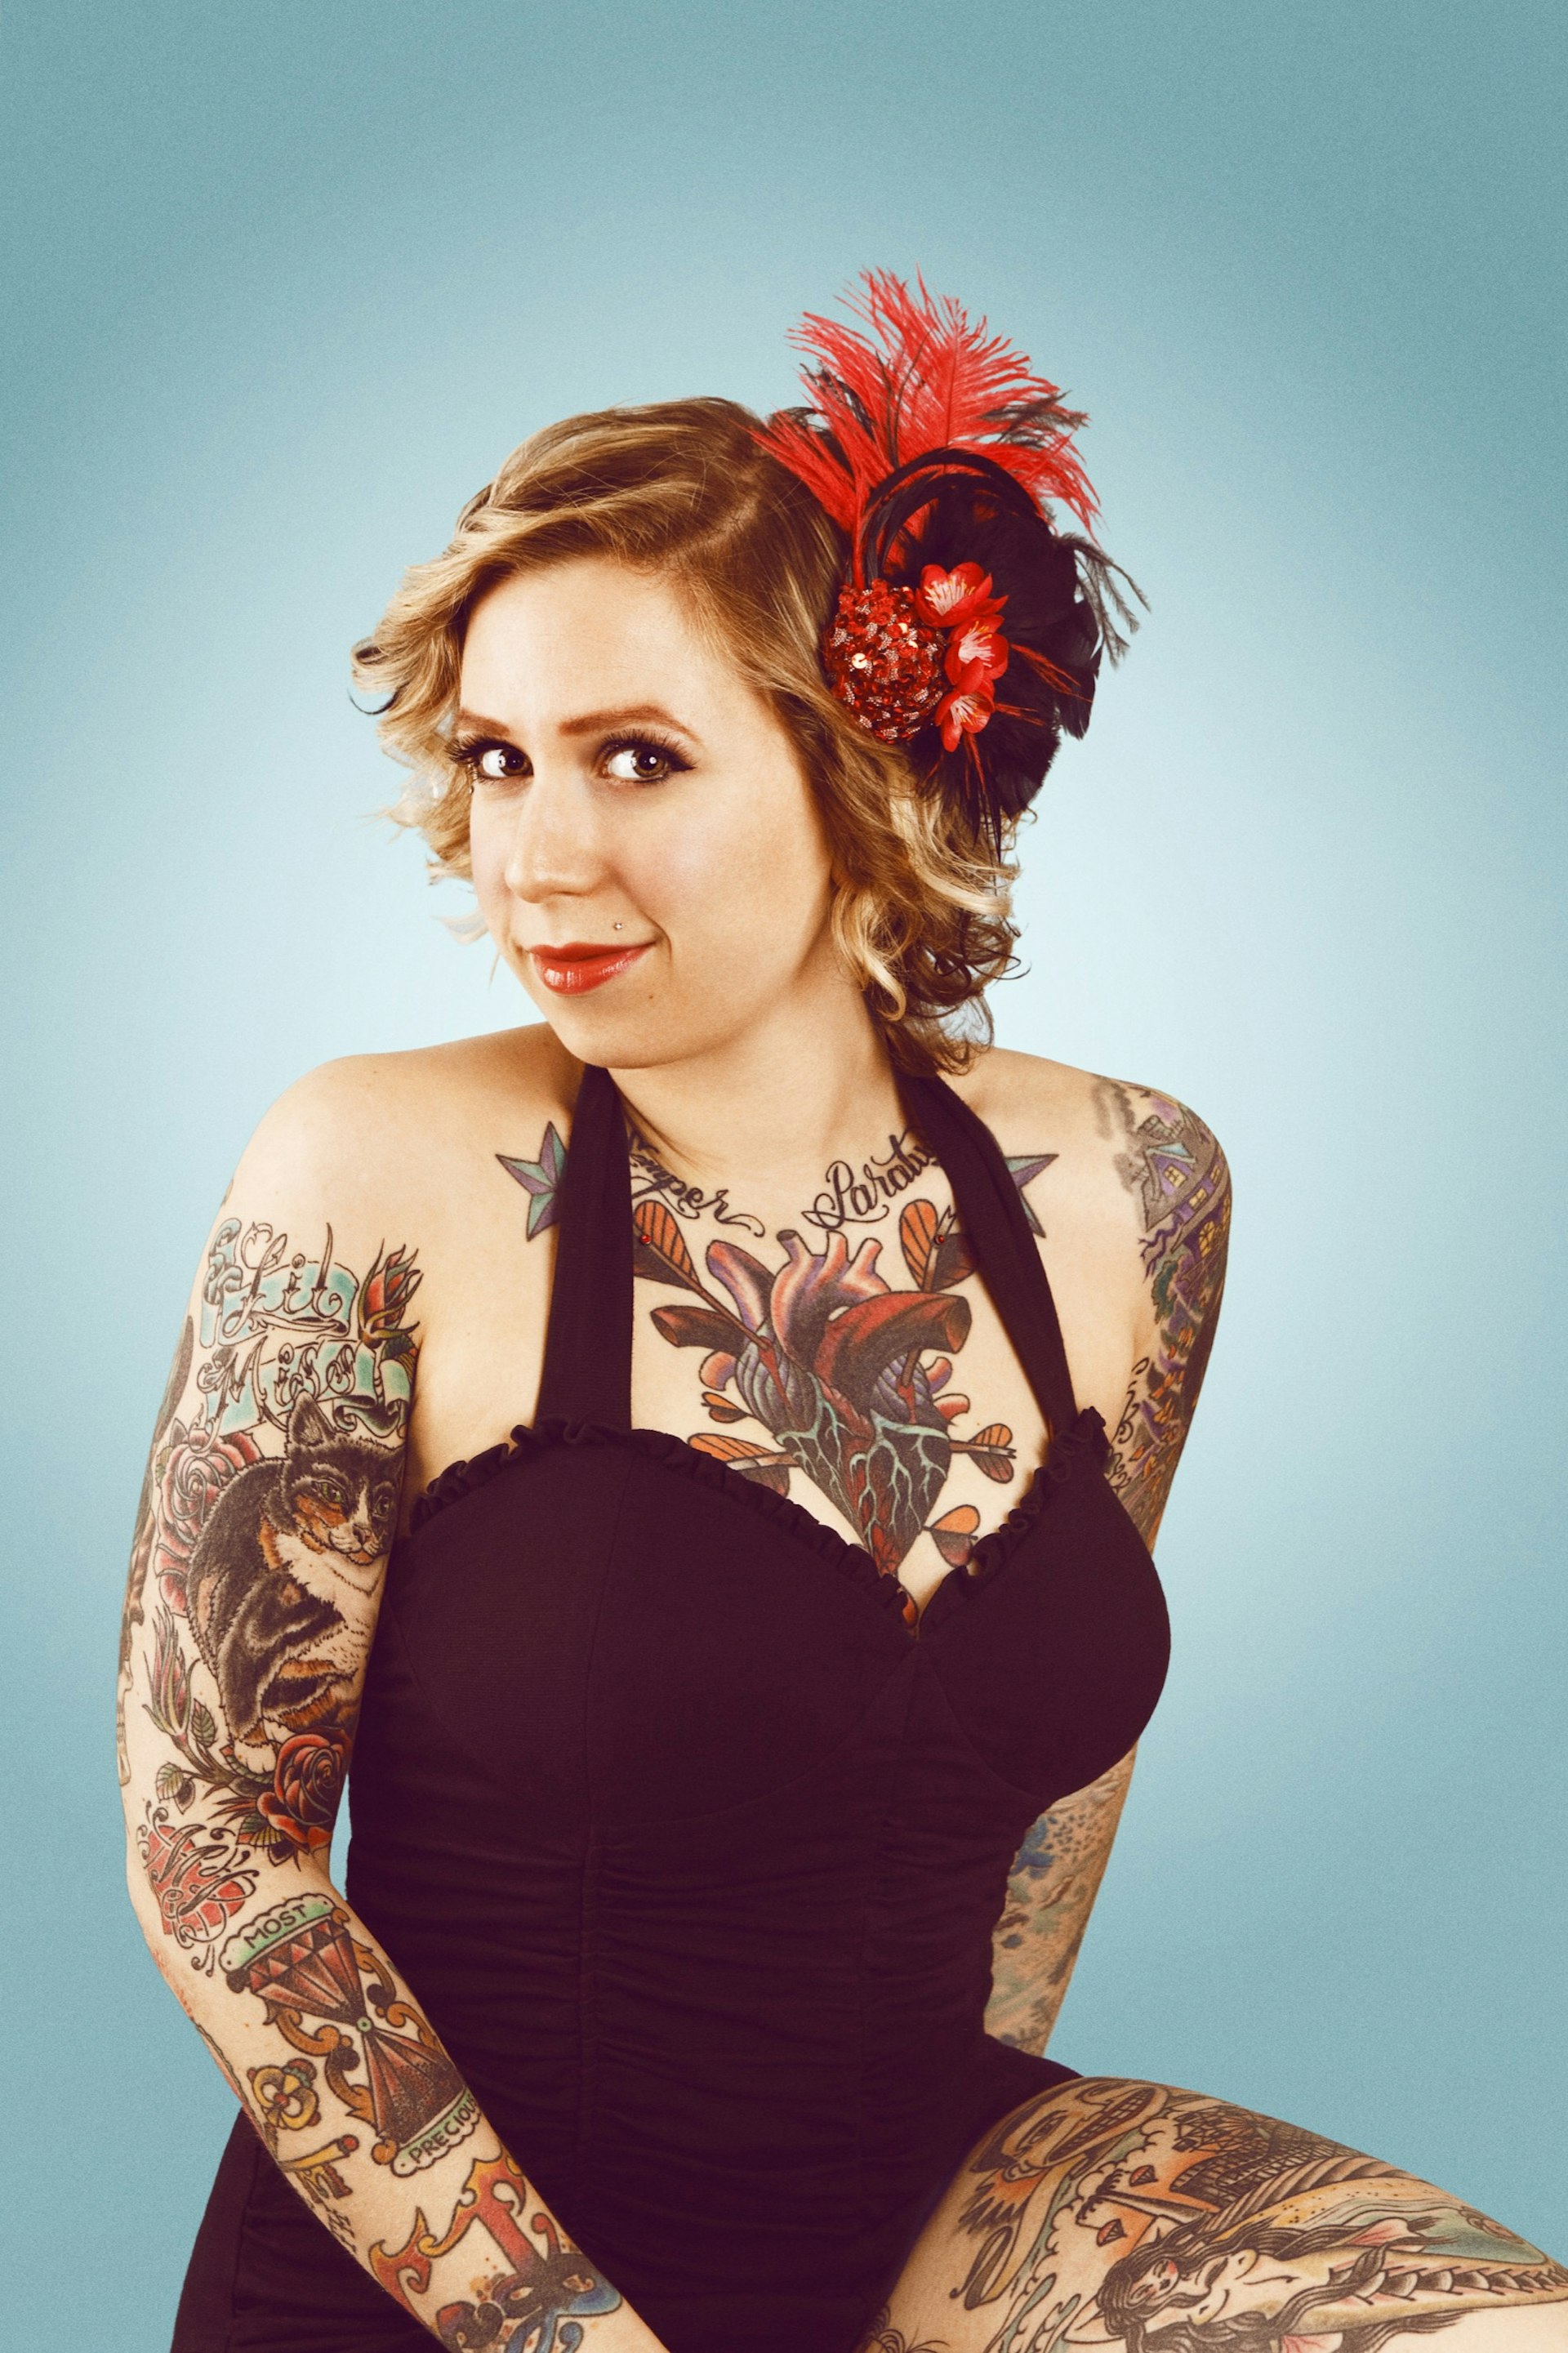 A woman wearing a black halter bathing suit is covered in American-style, colorful tattoos. She also has a large red head piece on the side of her head.